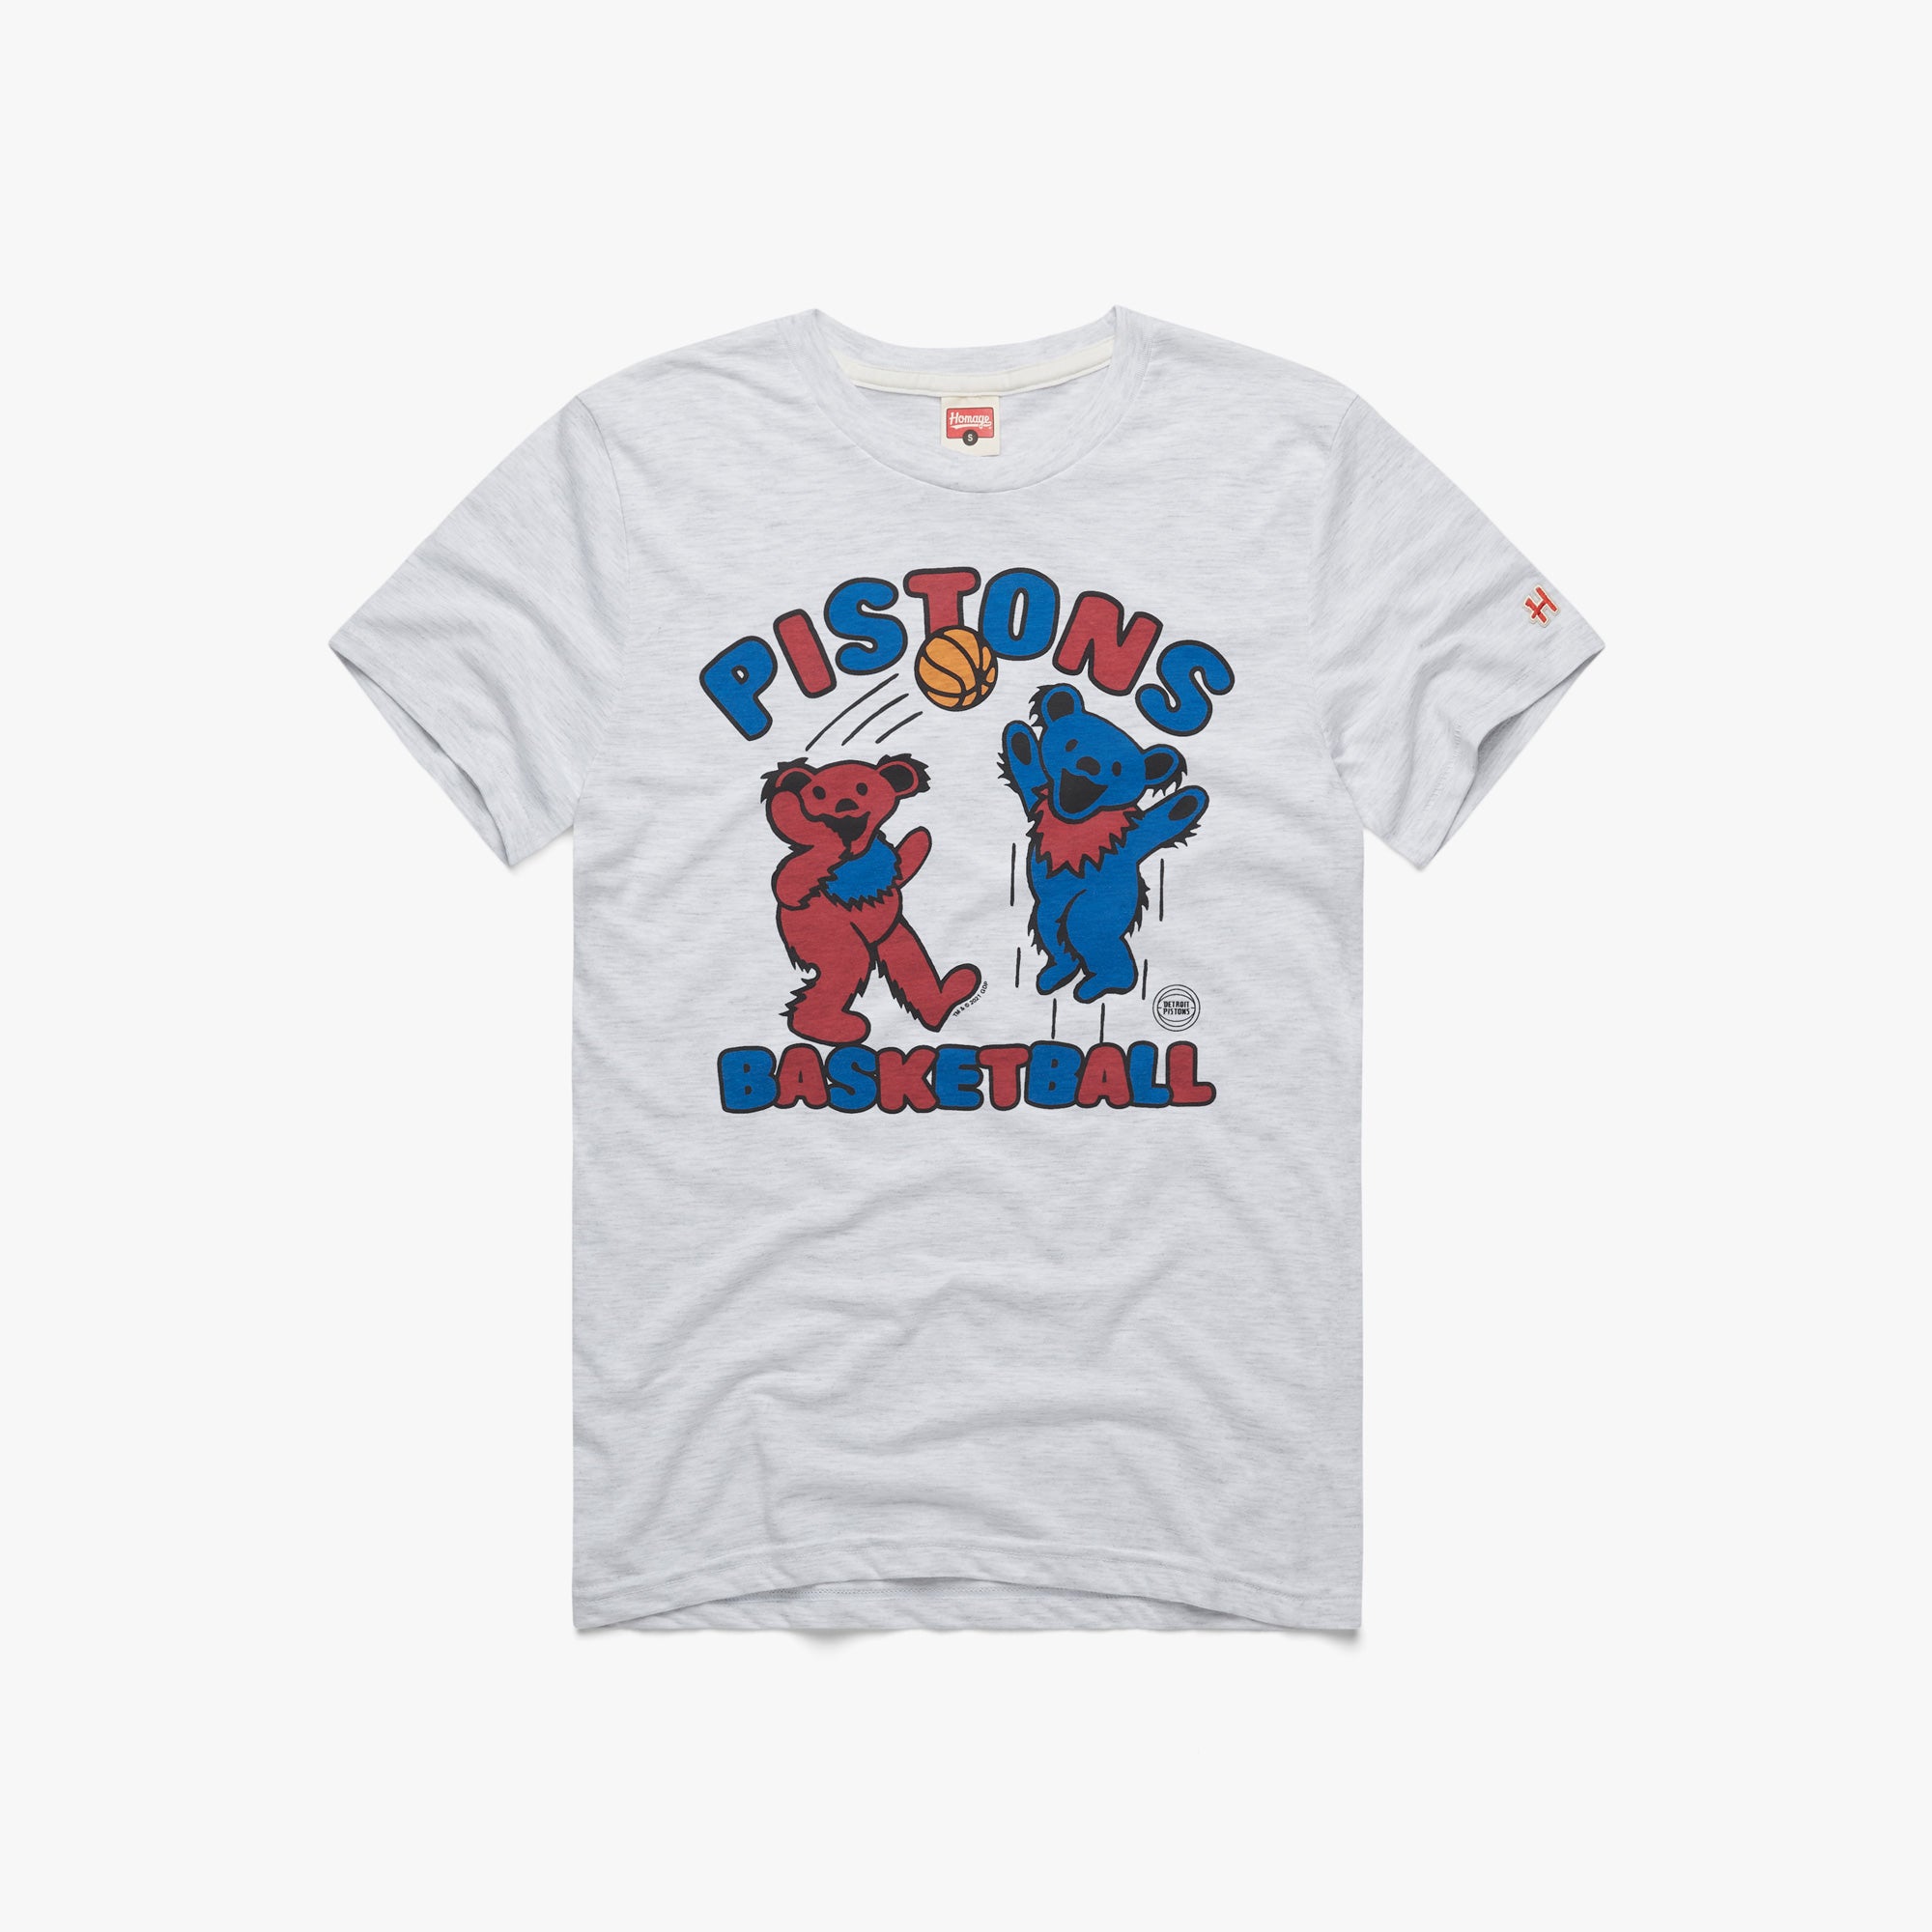 NBA x Grateful Dead x Pistons T-Shirt from Homage. | Ash | Vintage Apparel from Homage.